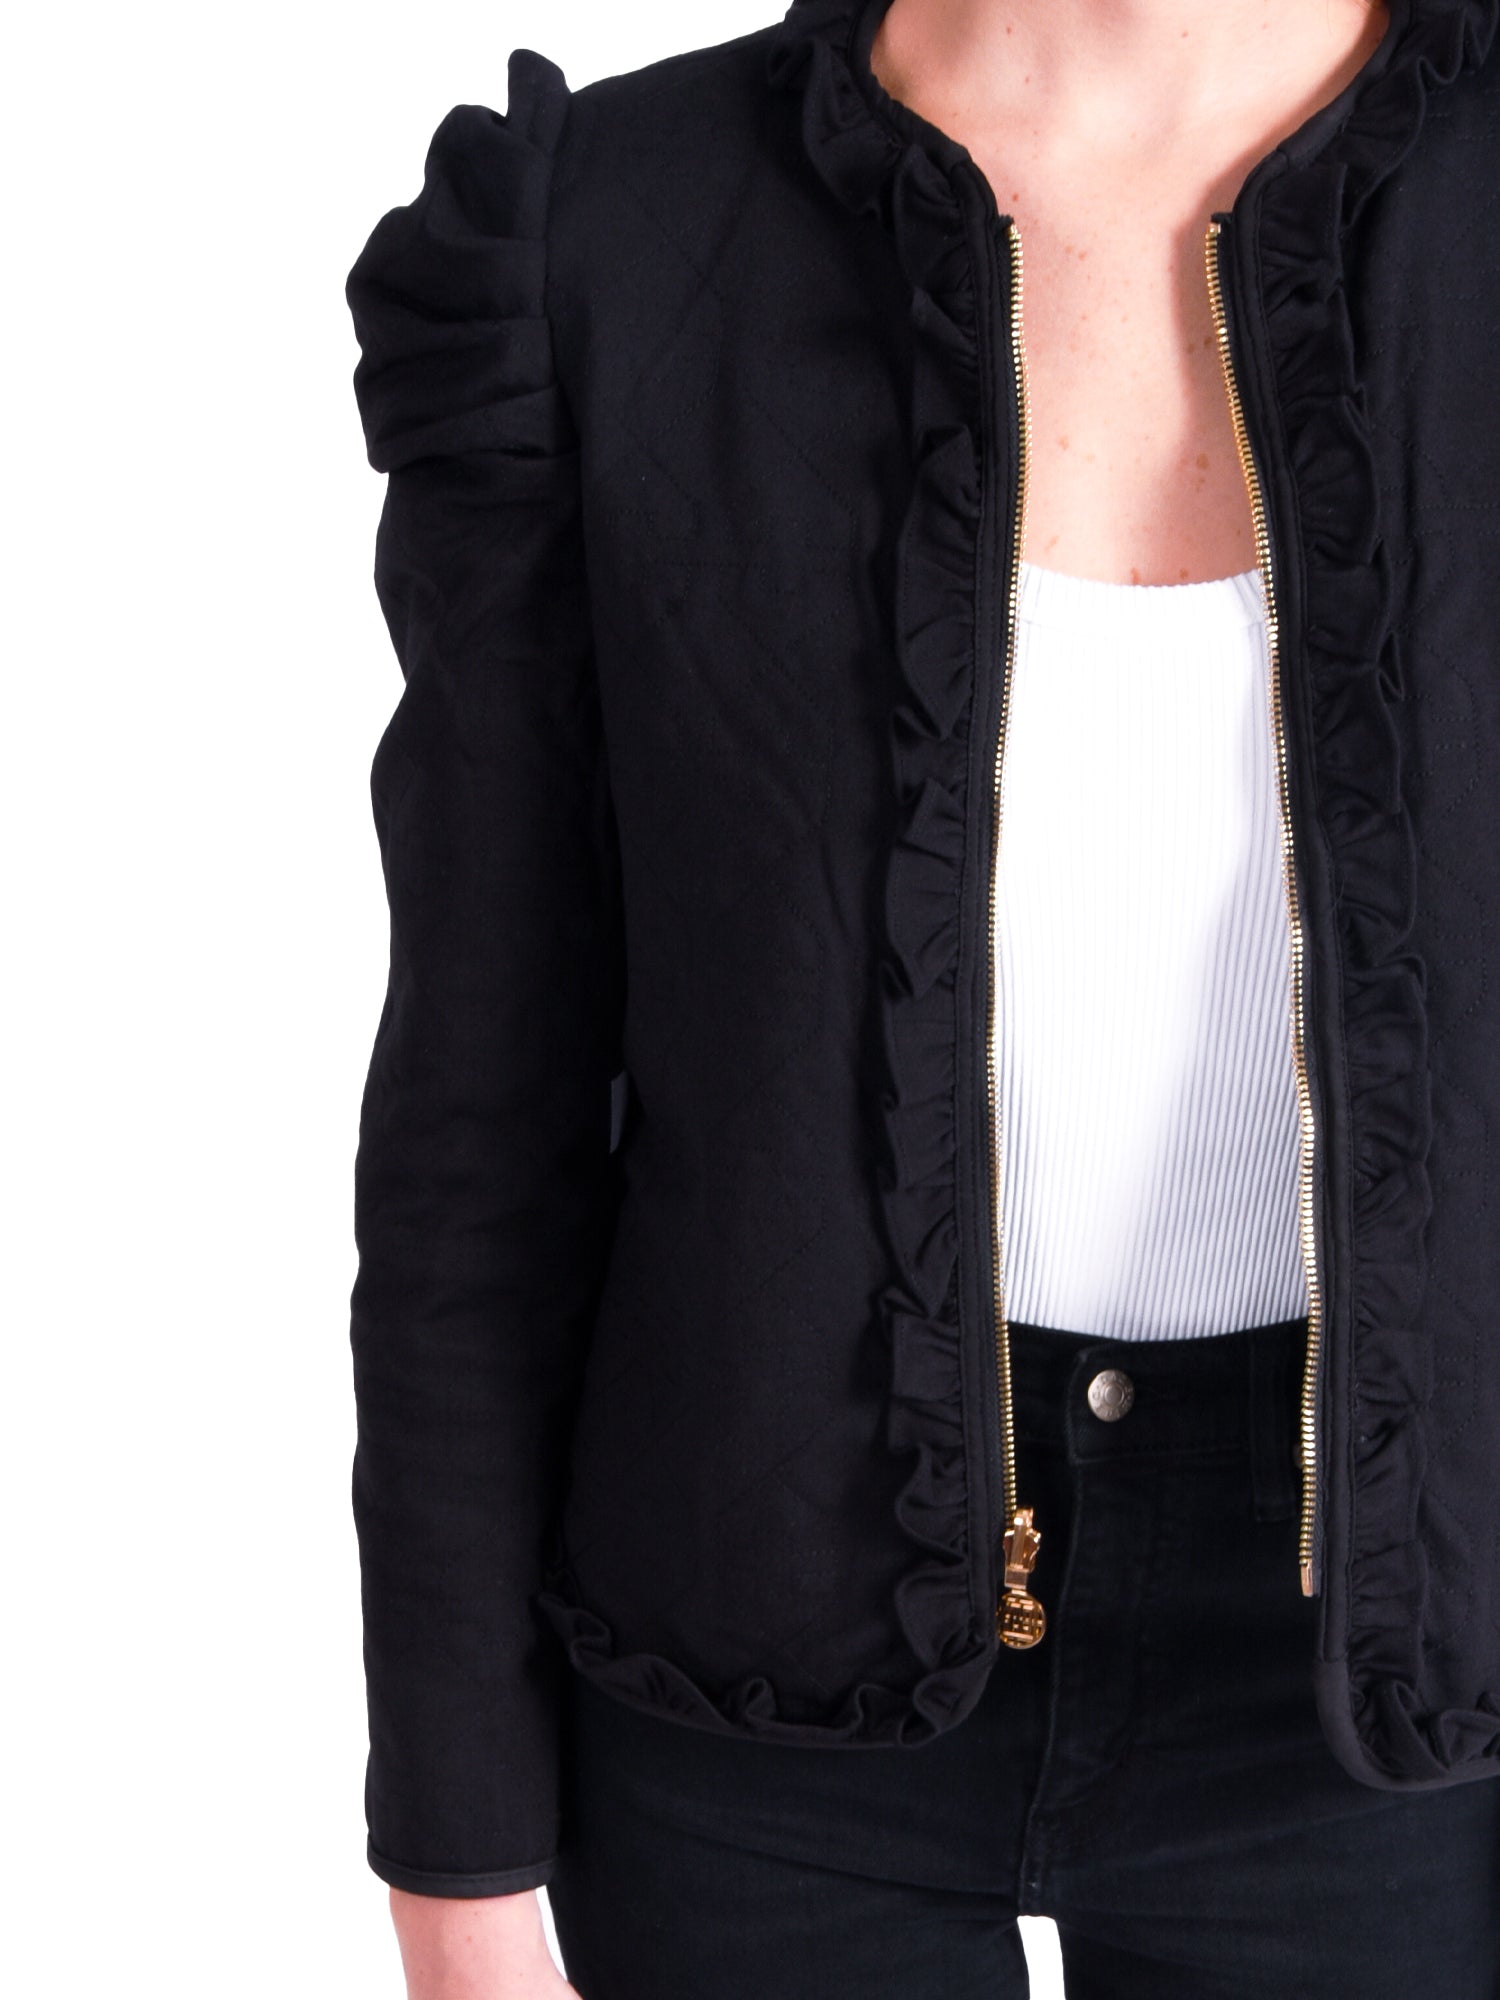 Cropped quilted sleeveless jacket